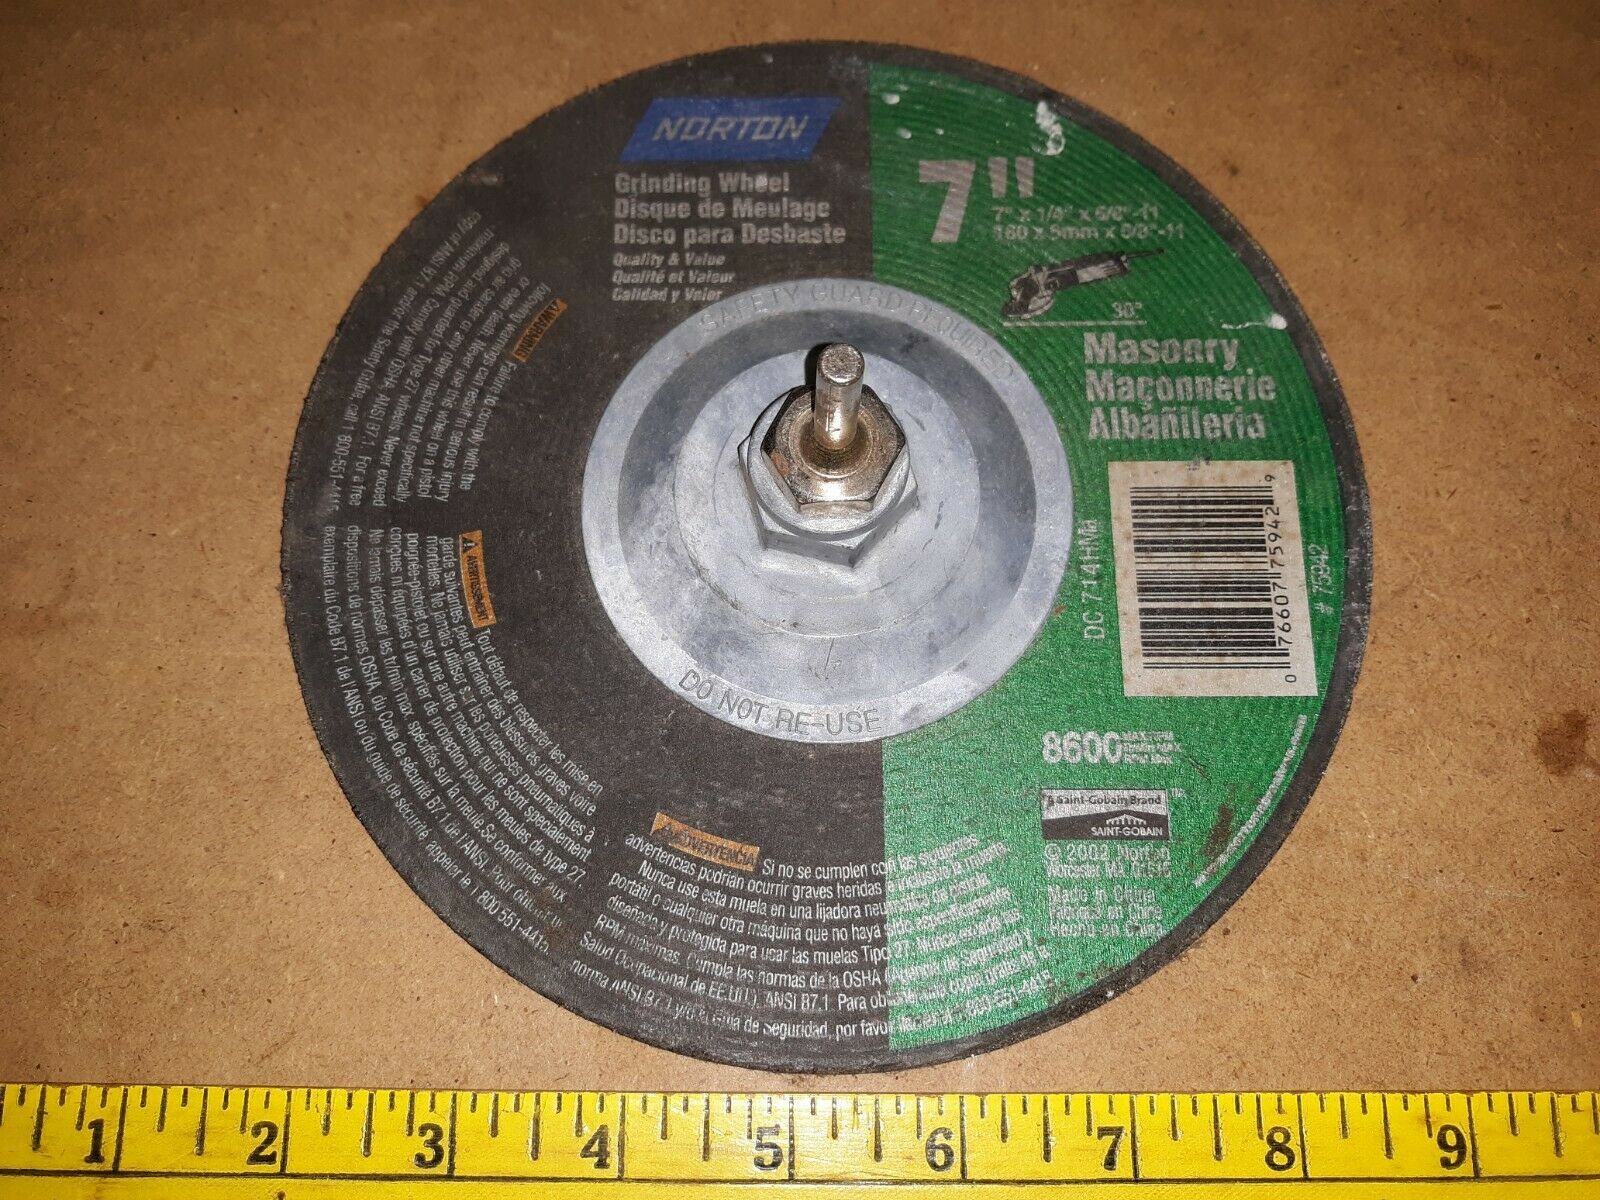 Primary image for 20EE06  GRINDING WHEEL, NORTON, 7” X 1/4”, MASONRY, WITH 1/4” MANDREL, LOOKS NEW